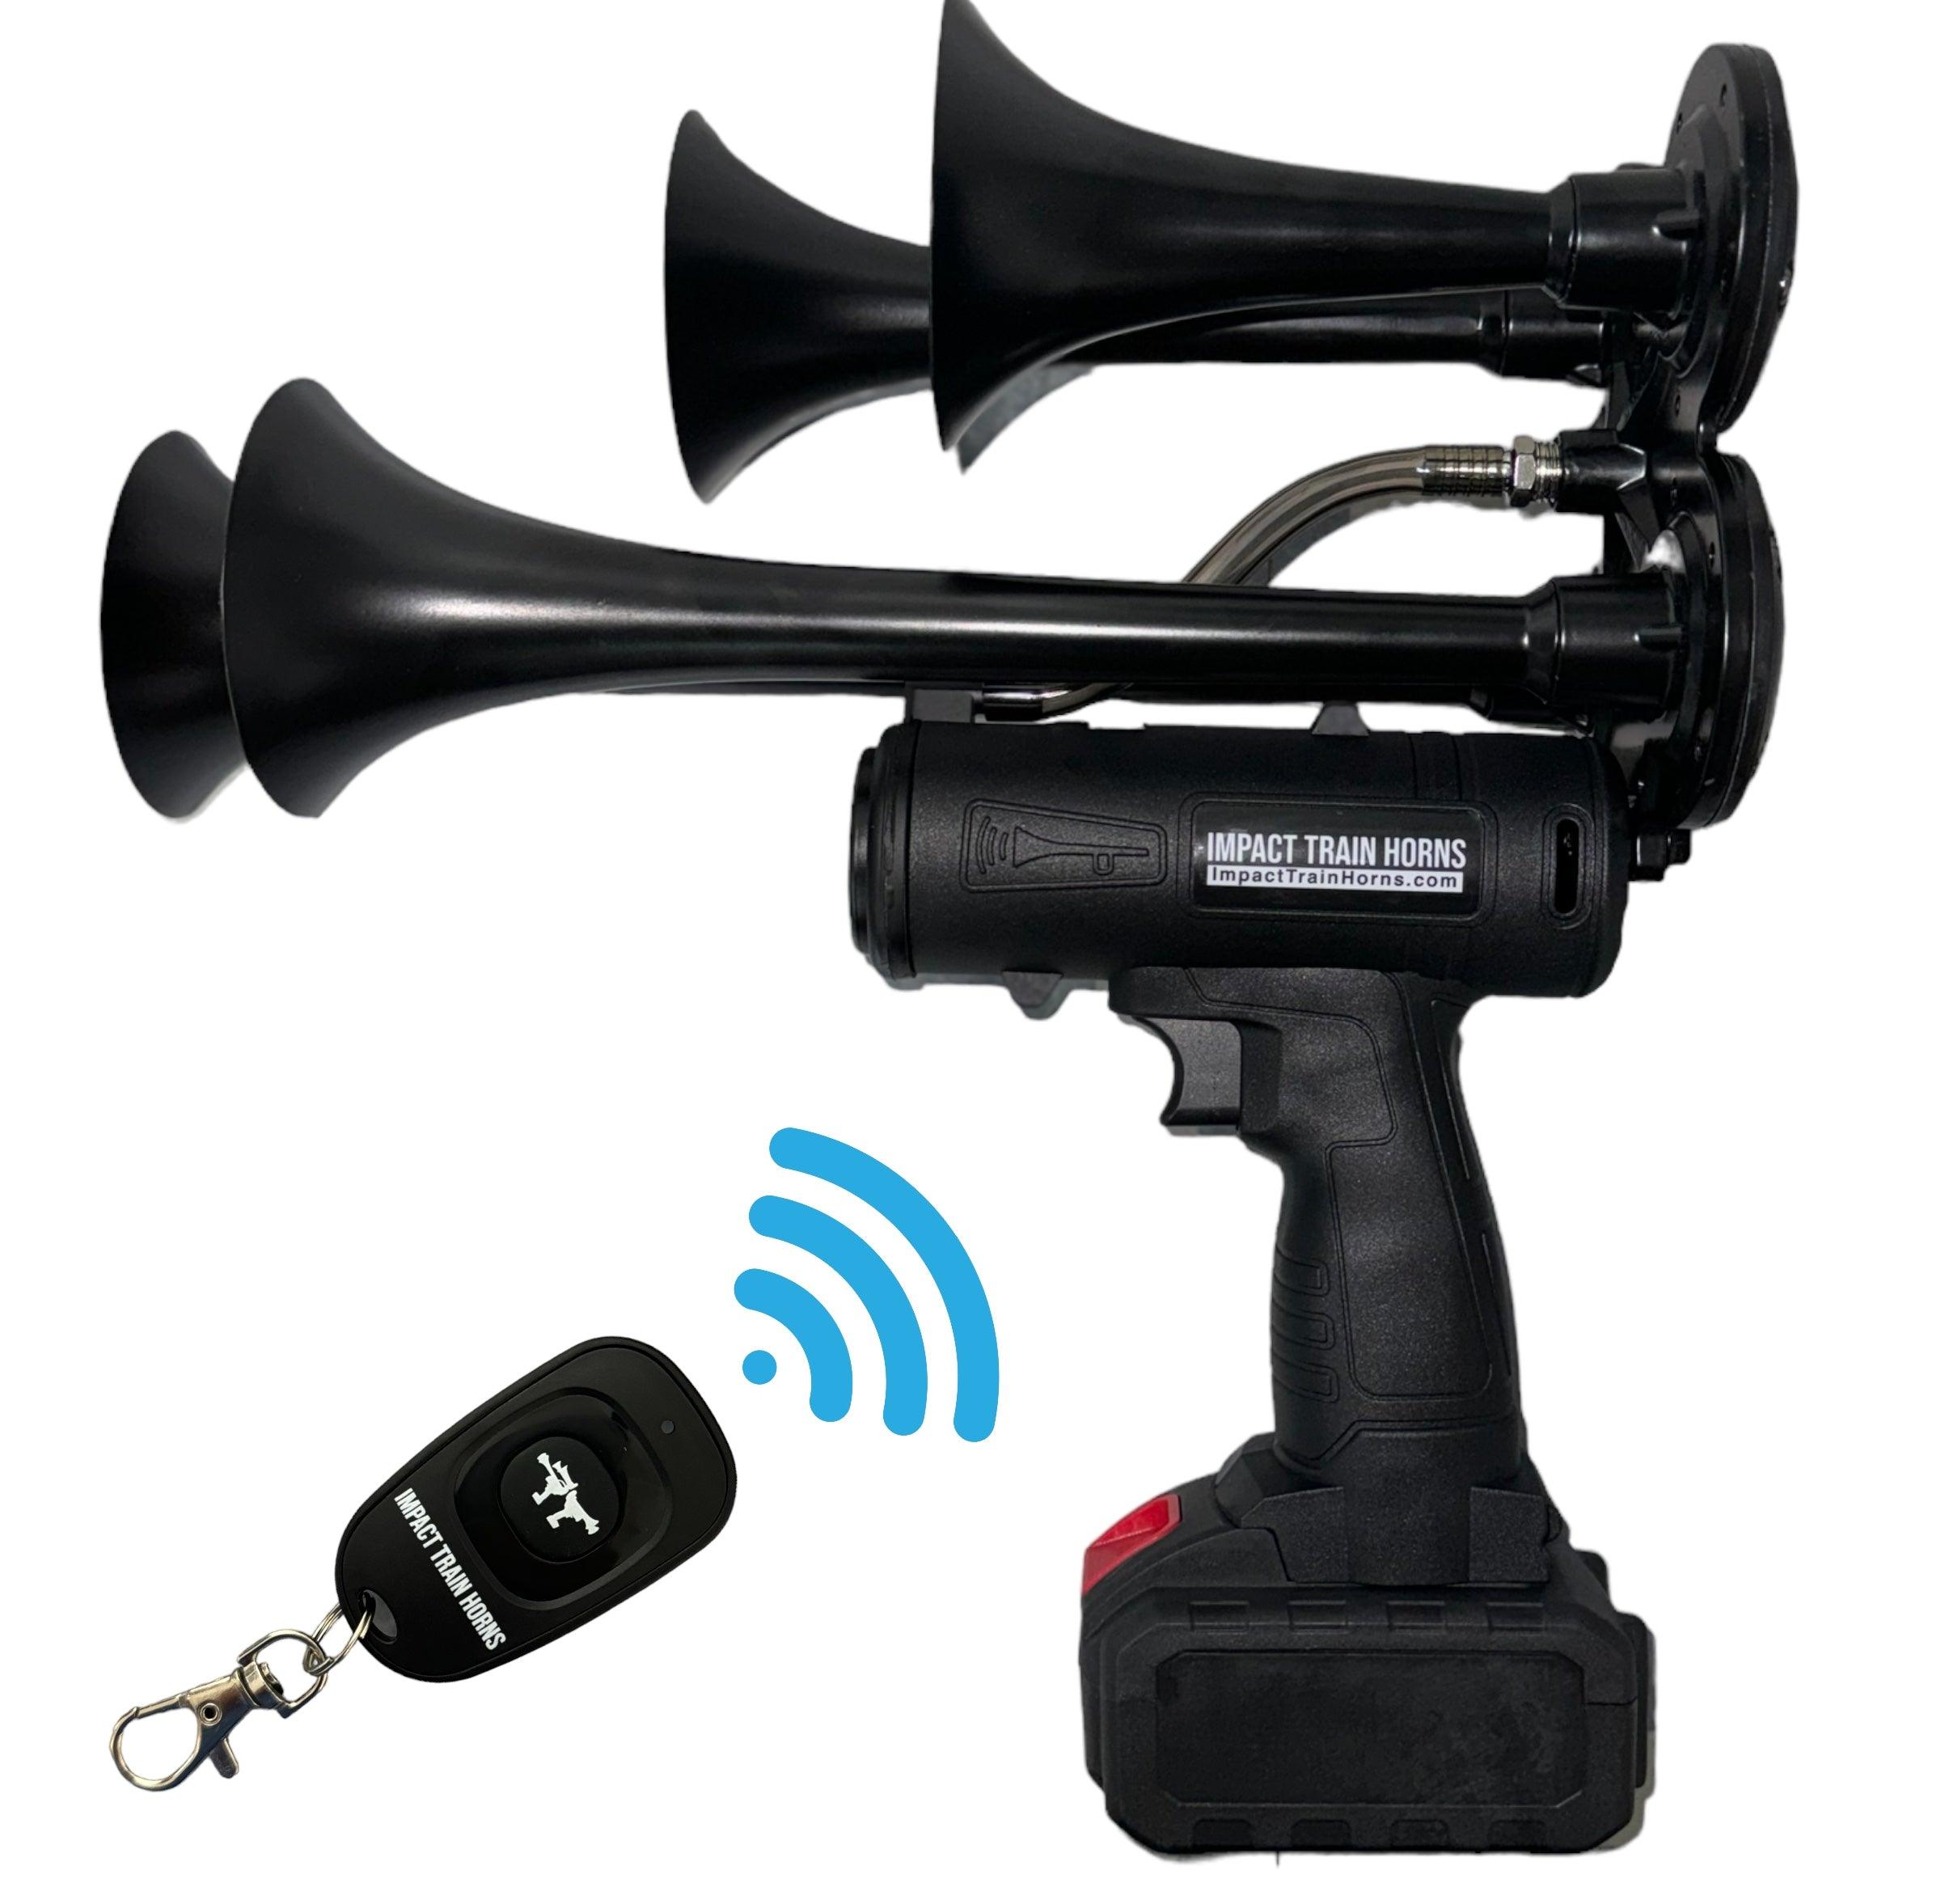 Portable Stadium Train horn system with Remote Control !! Football Gam